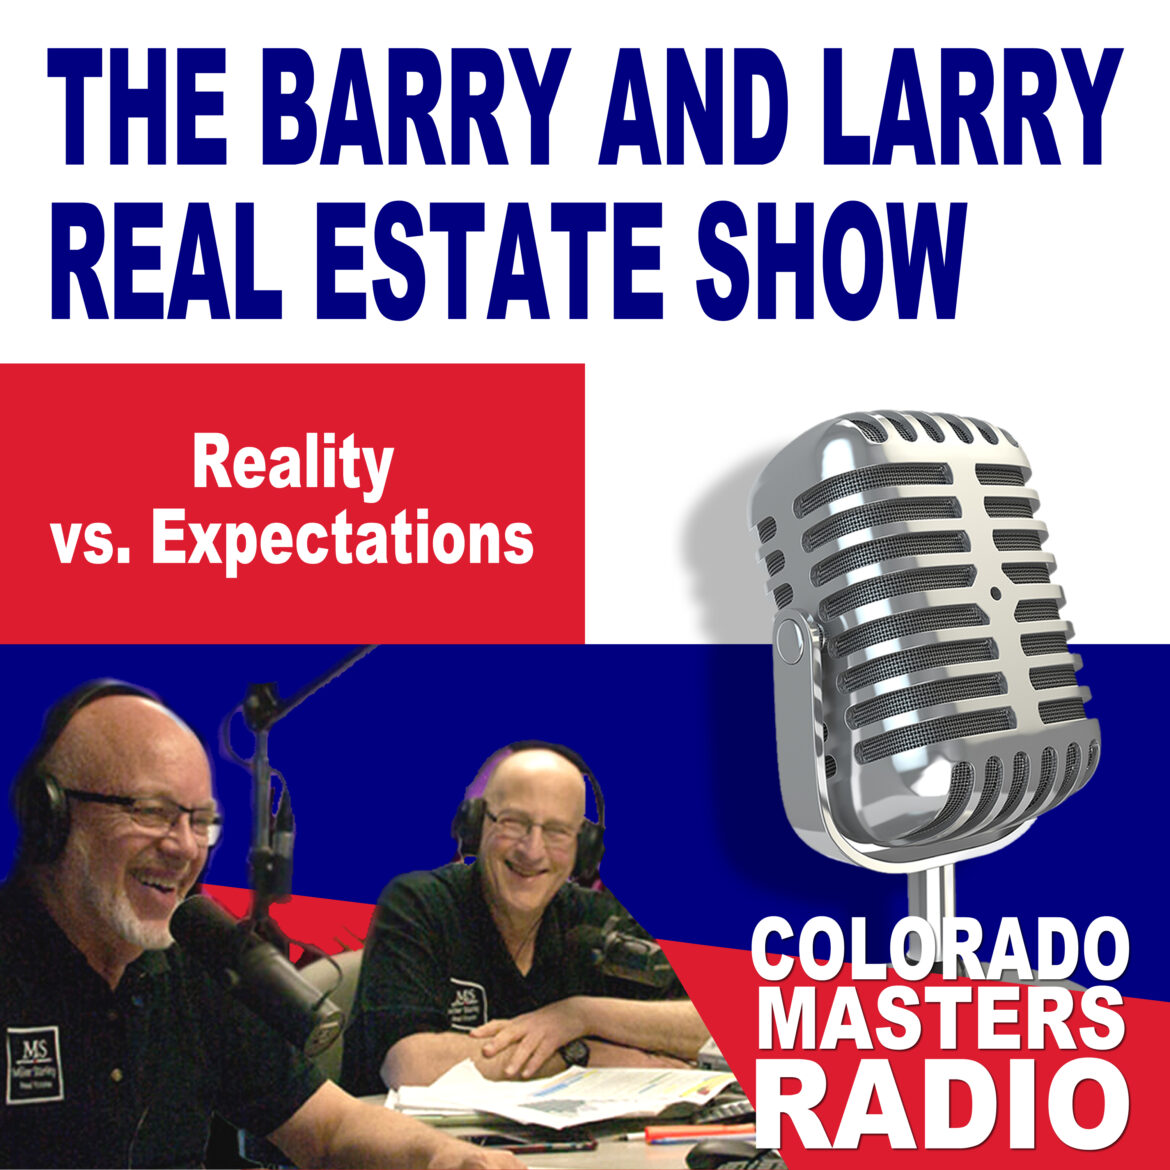 The Larry and Barry Real Estate Show - Reality vs Expectations